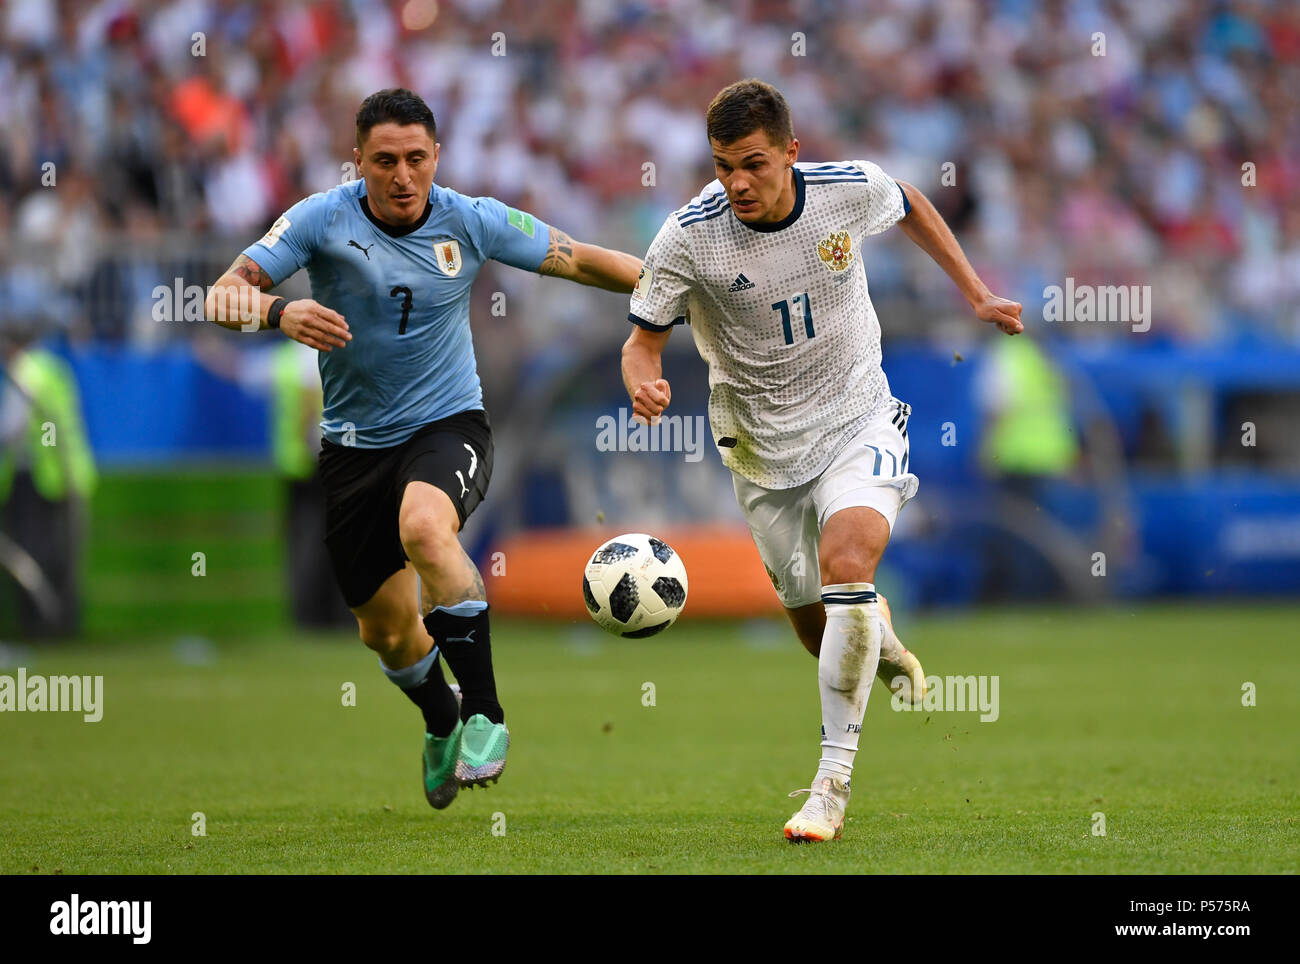 Samara, Russia. 25th June, 2018. Soccer: World Cup, group stages, group A, 3rd matchday Uruguay vs Russia, at Samara Stadium. Russia's Roman Zobnin (R) and Uruguay's Cristian Rodriguez vie for the ball. Credit: Marius Becker/dpa/Alamy Live News Stock Photo